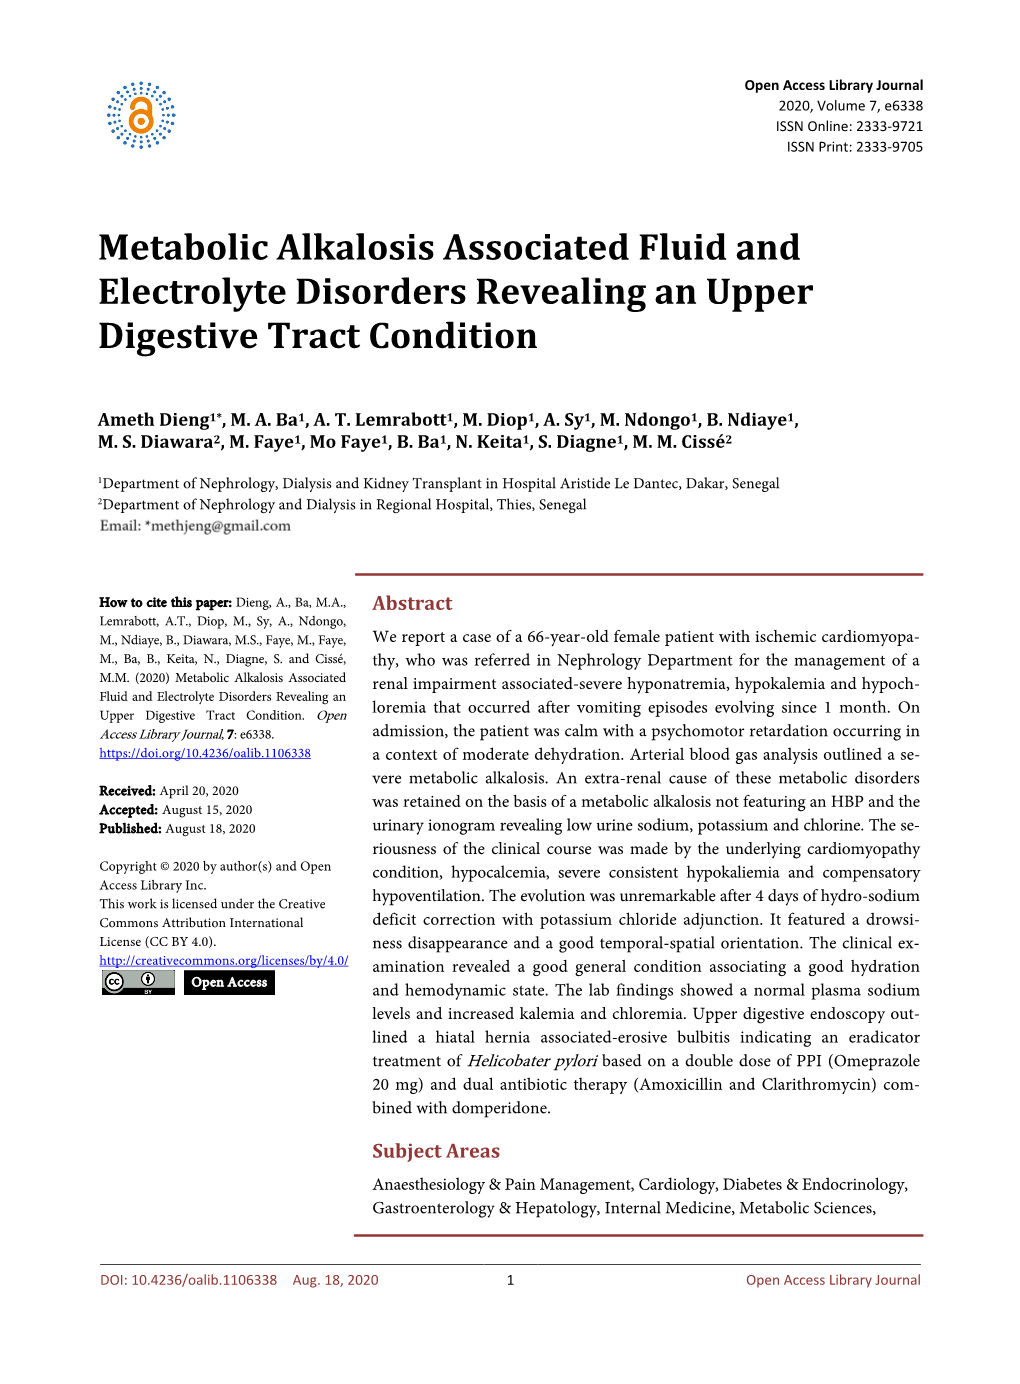 Metabolic Alkalosis Associated Fluid and Electrolyte Disorders Revealing an Upper Digestive Tract Condition